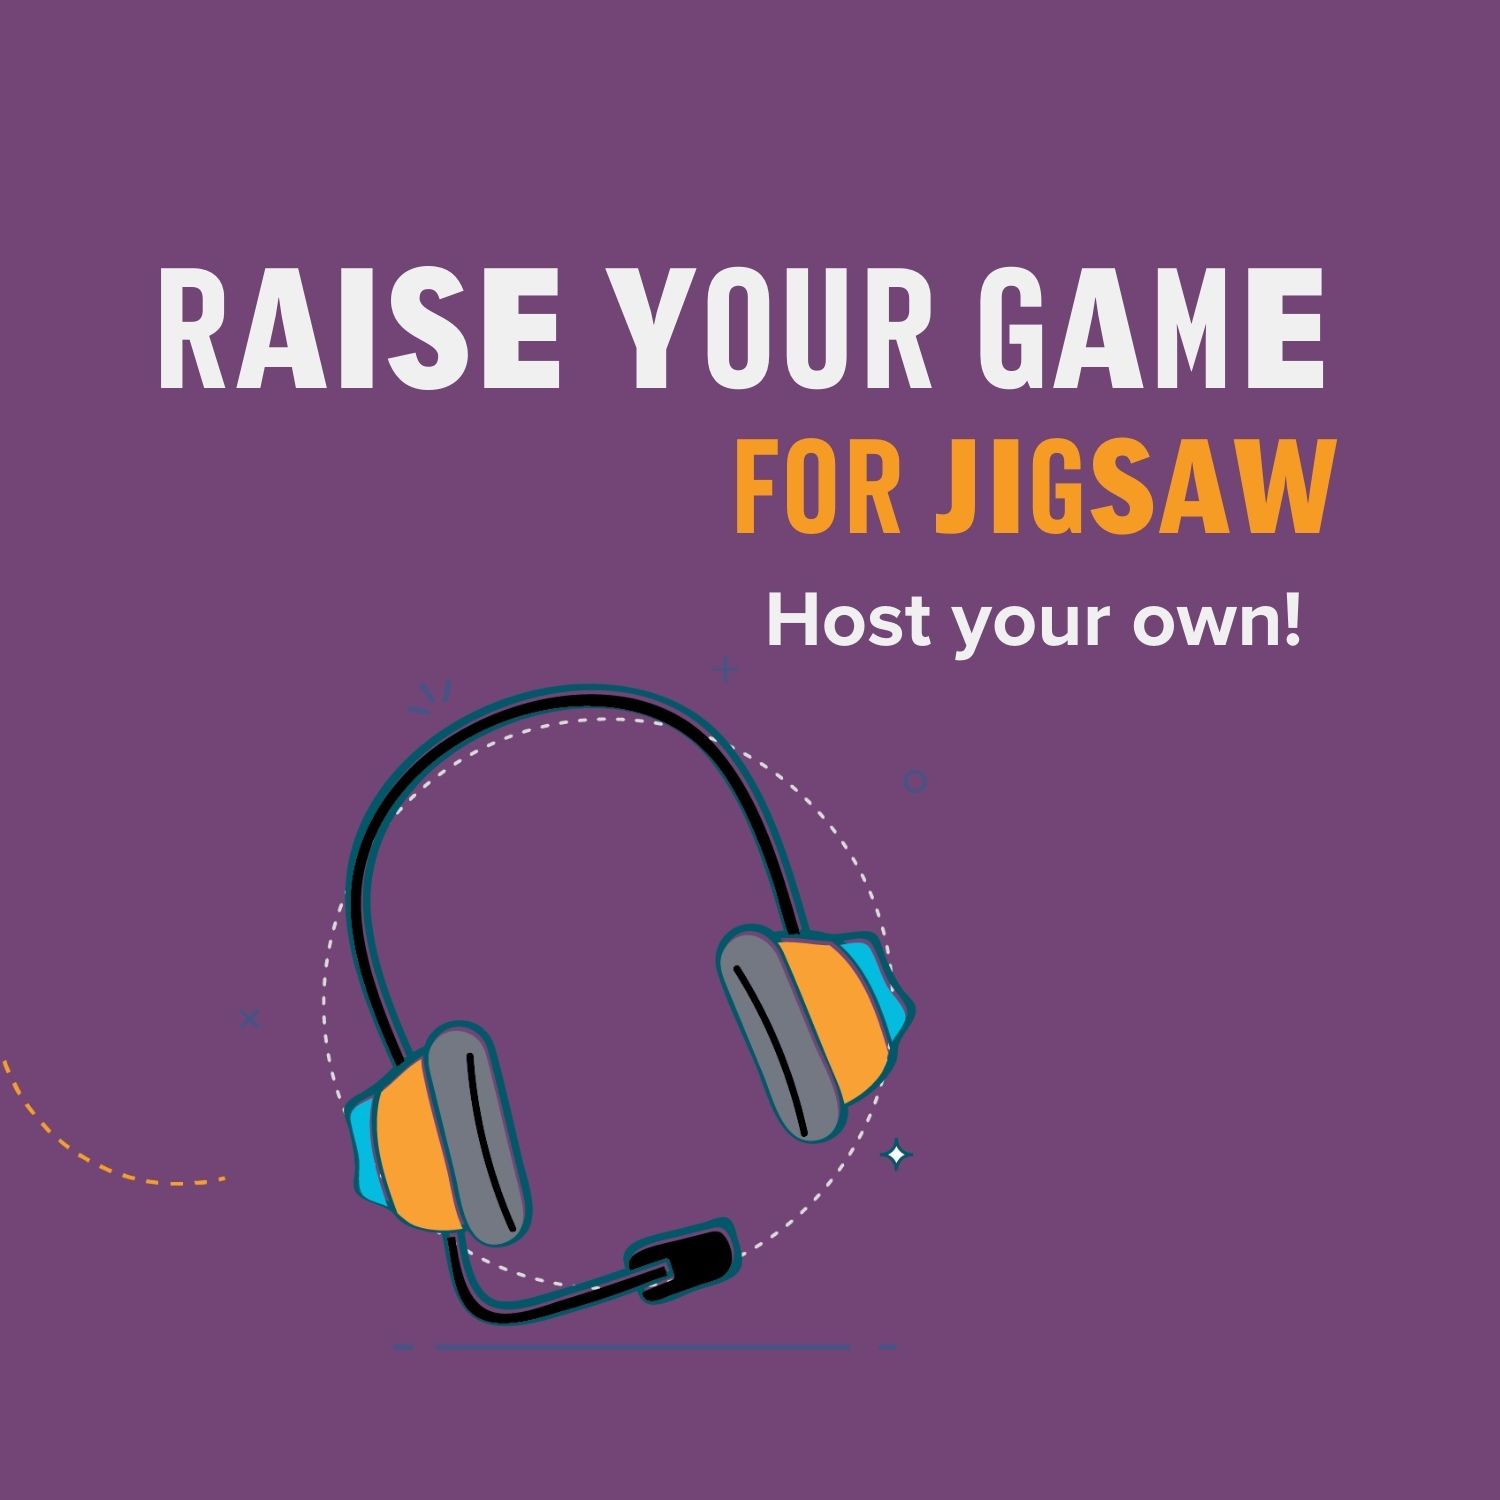 raise your game for Jigsaw logo with headphones